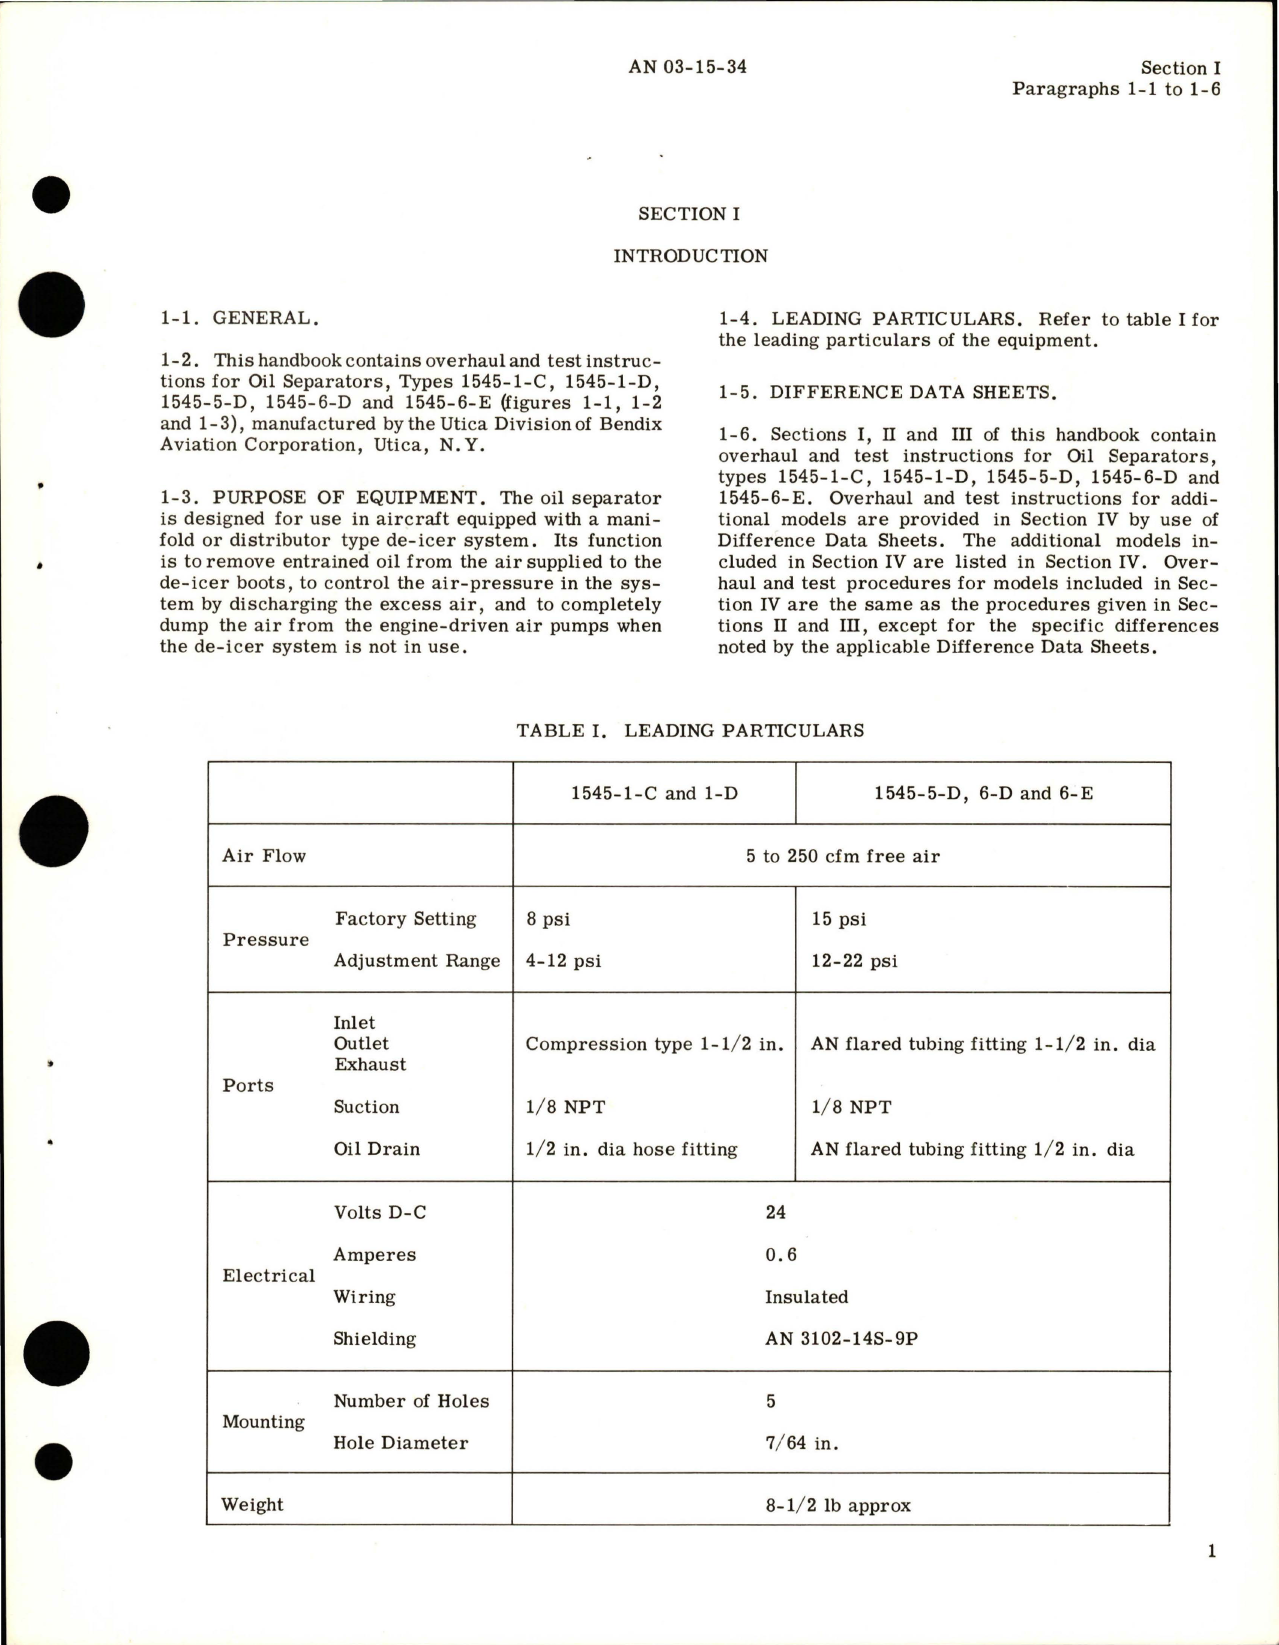 Sample page 5 from AirCorps Library document: Overhaul Instructions for Oil Separator - Parts 659-1-A, 1545-1-C, 1545-1-D, 1545-5-D, 1545-6-D, and 1545-6-E 